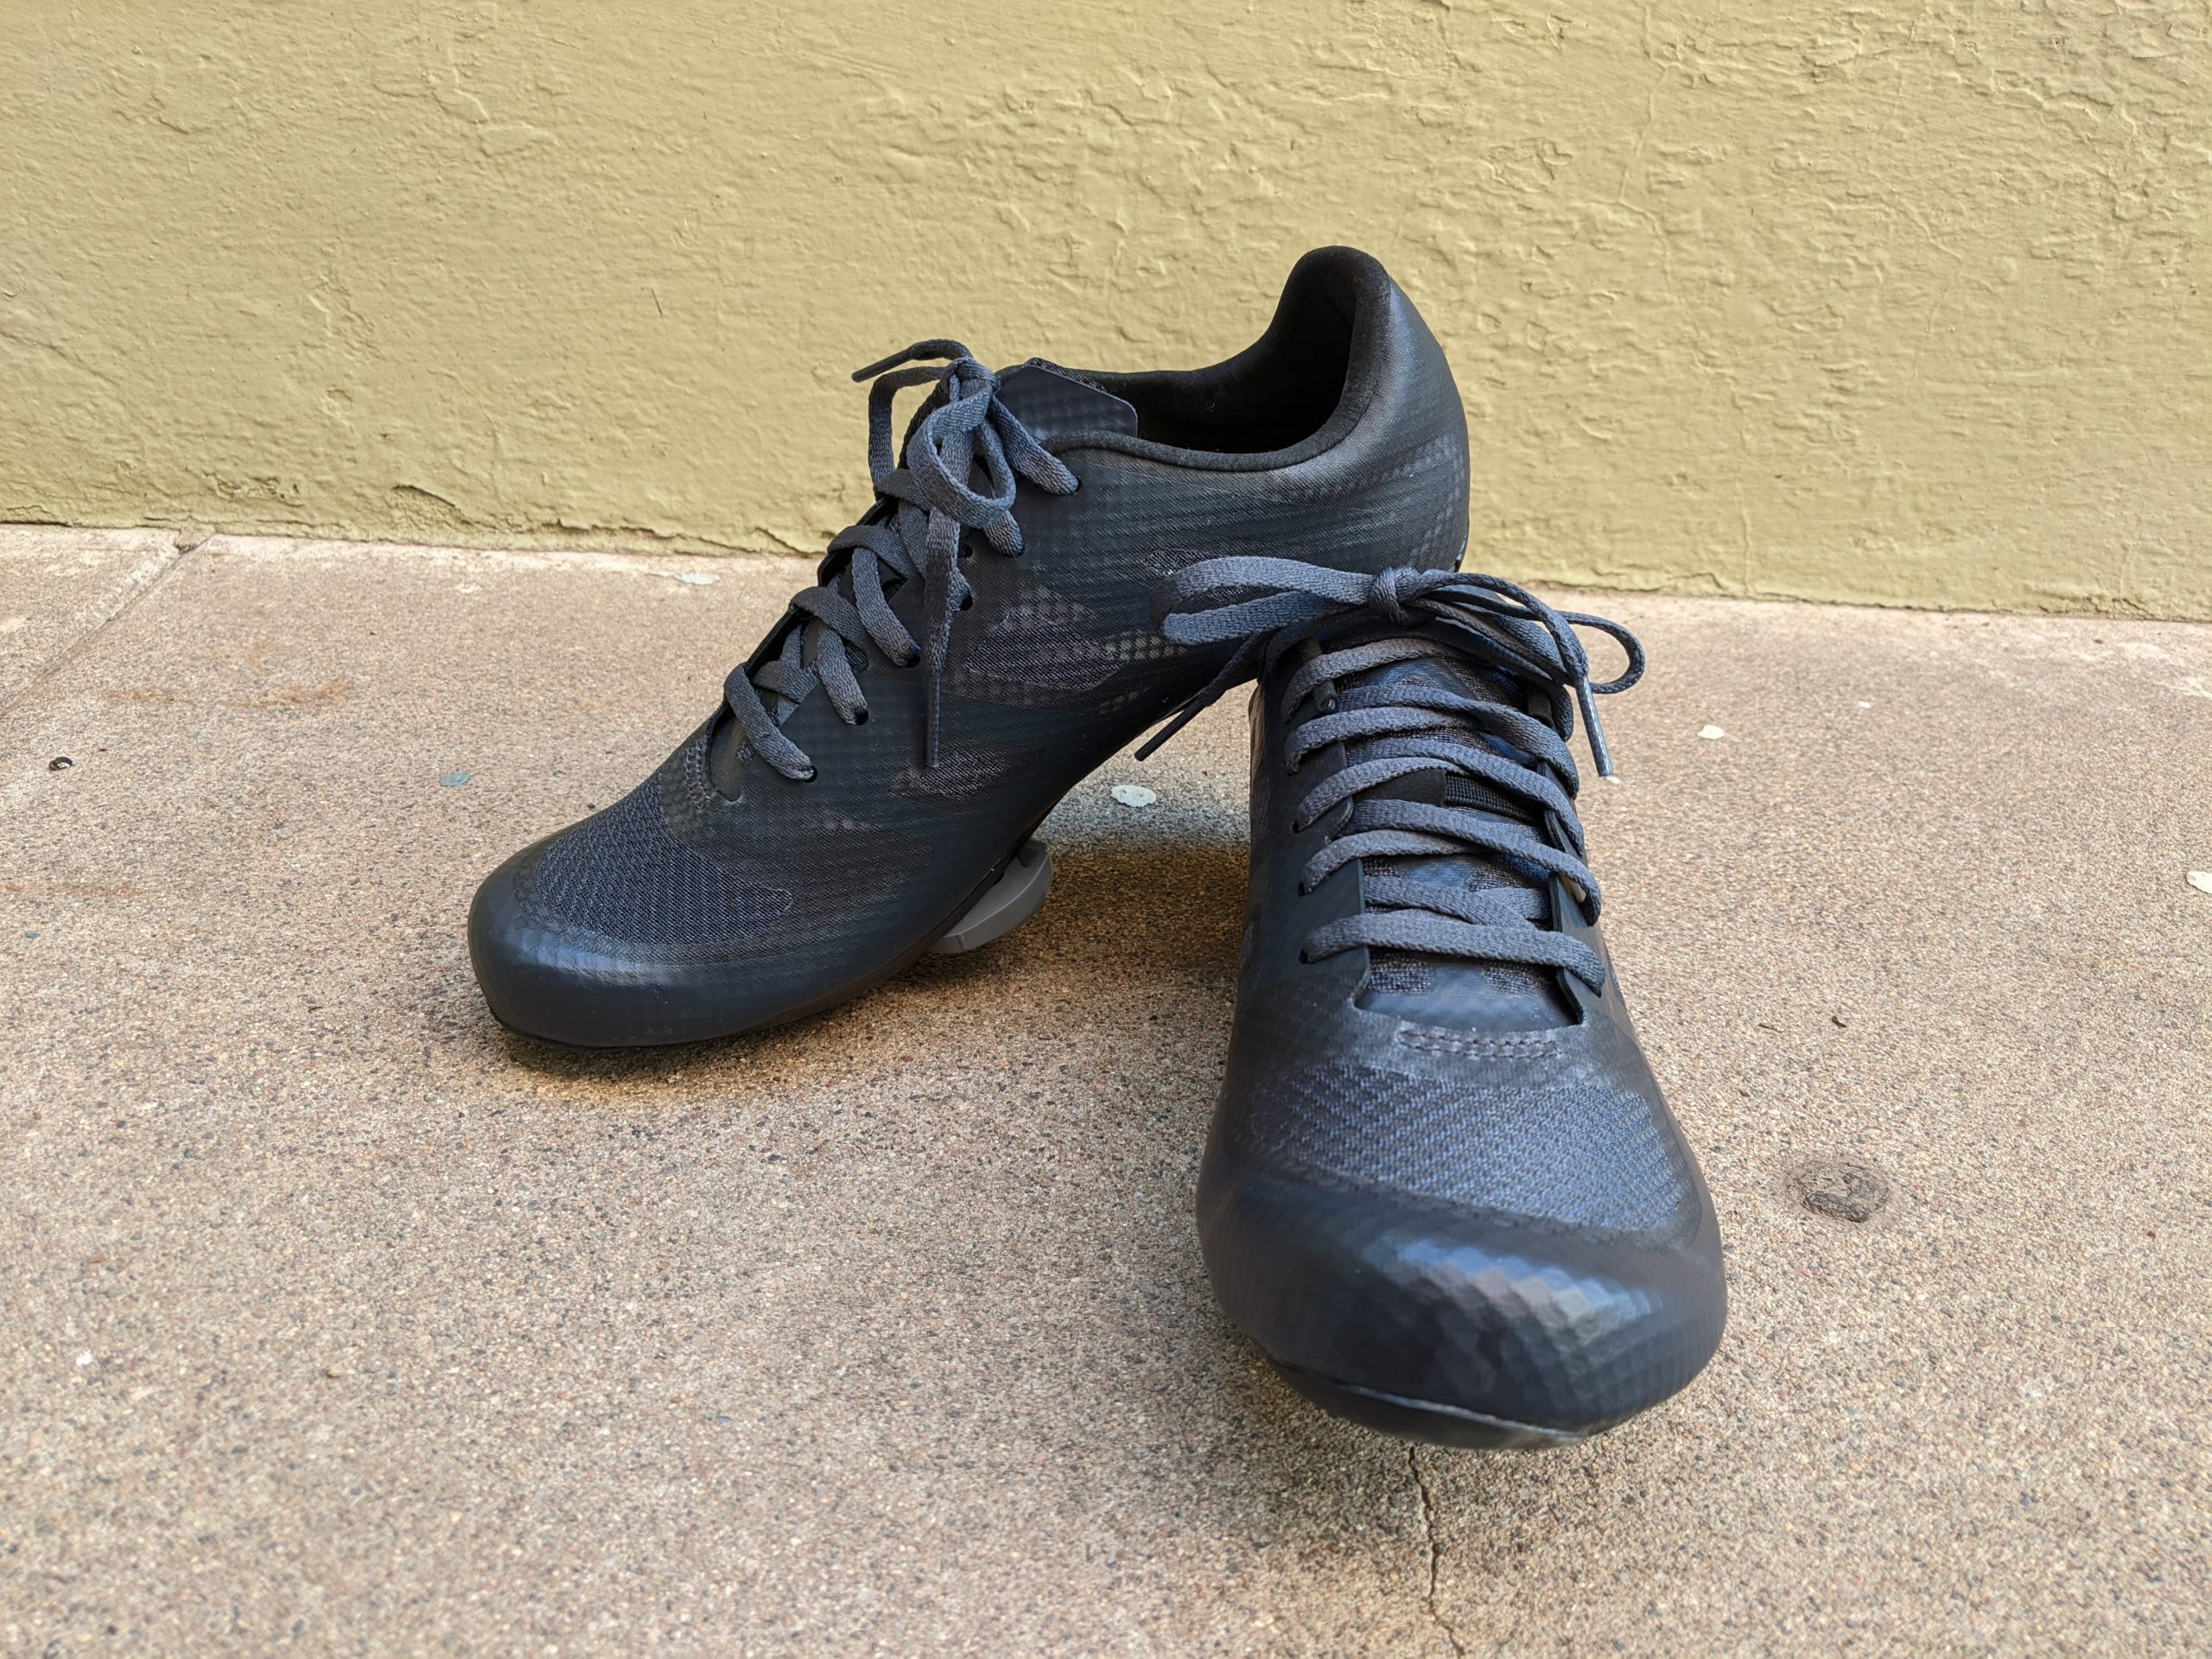 Pearl Izumi PRO Air Shoes review